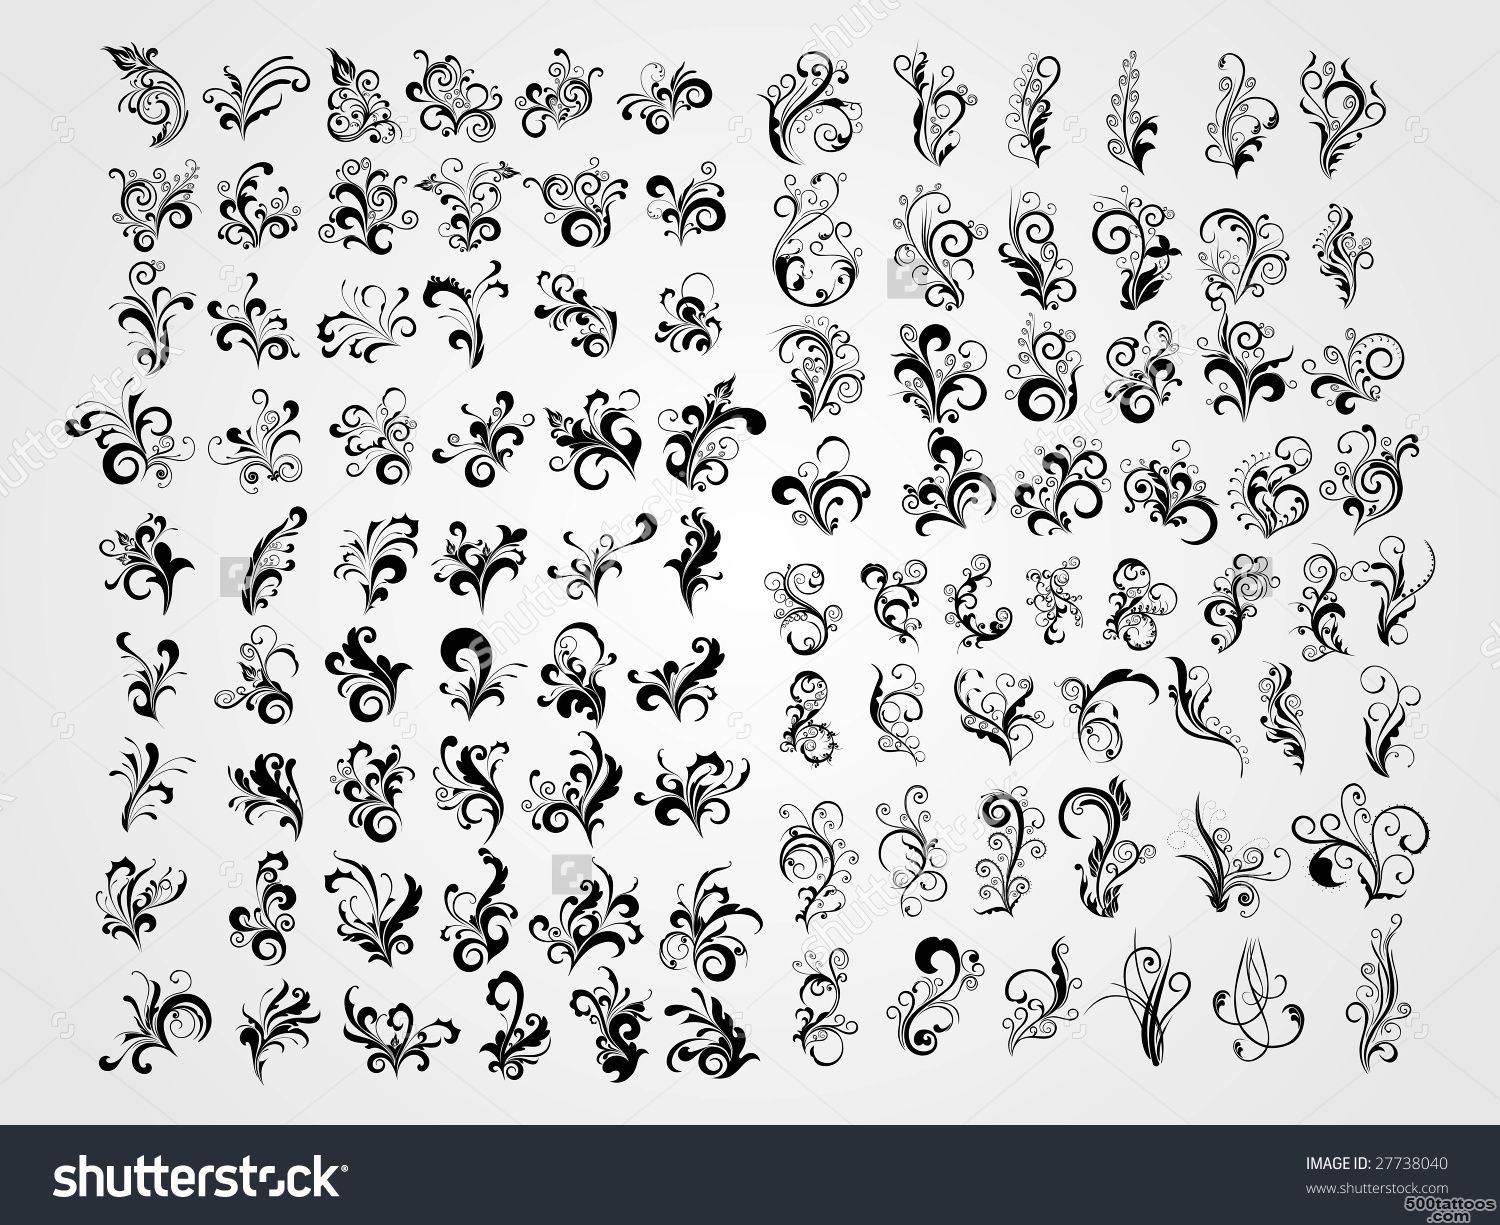 Background With Group Of Retro Black Tattoos, Tattoo Stock Vector ..._19